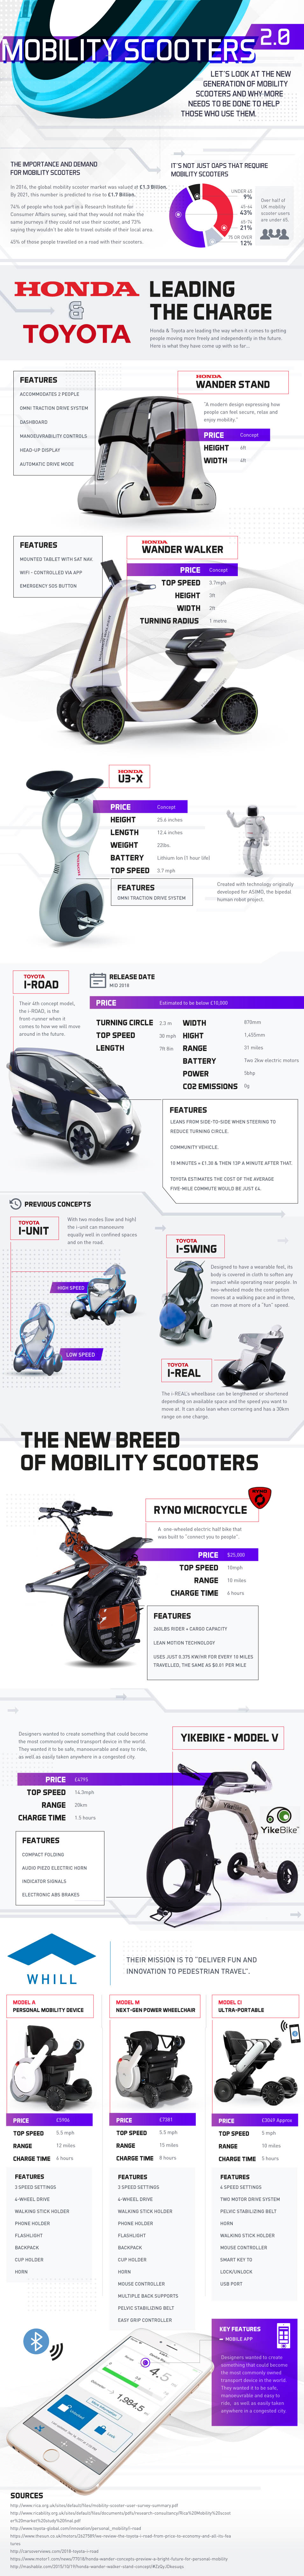 Mobility Scooters 2.0